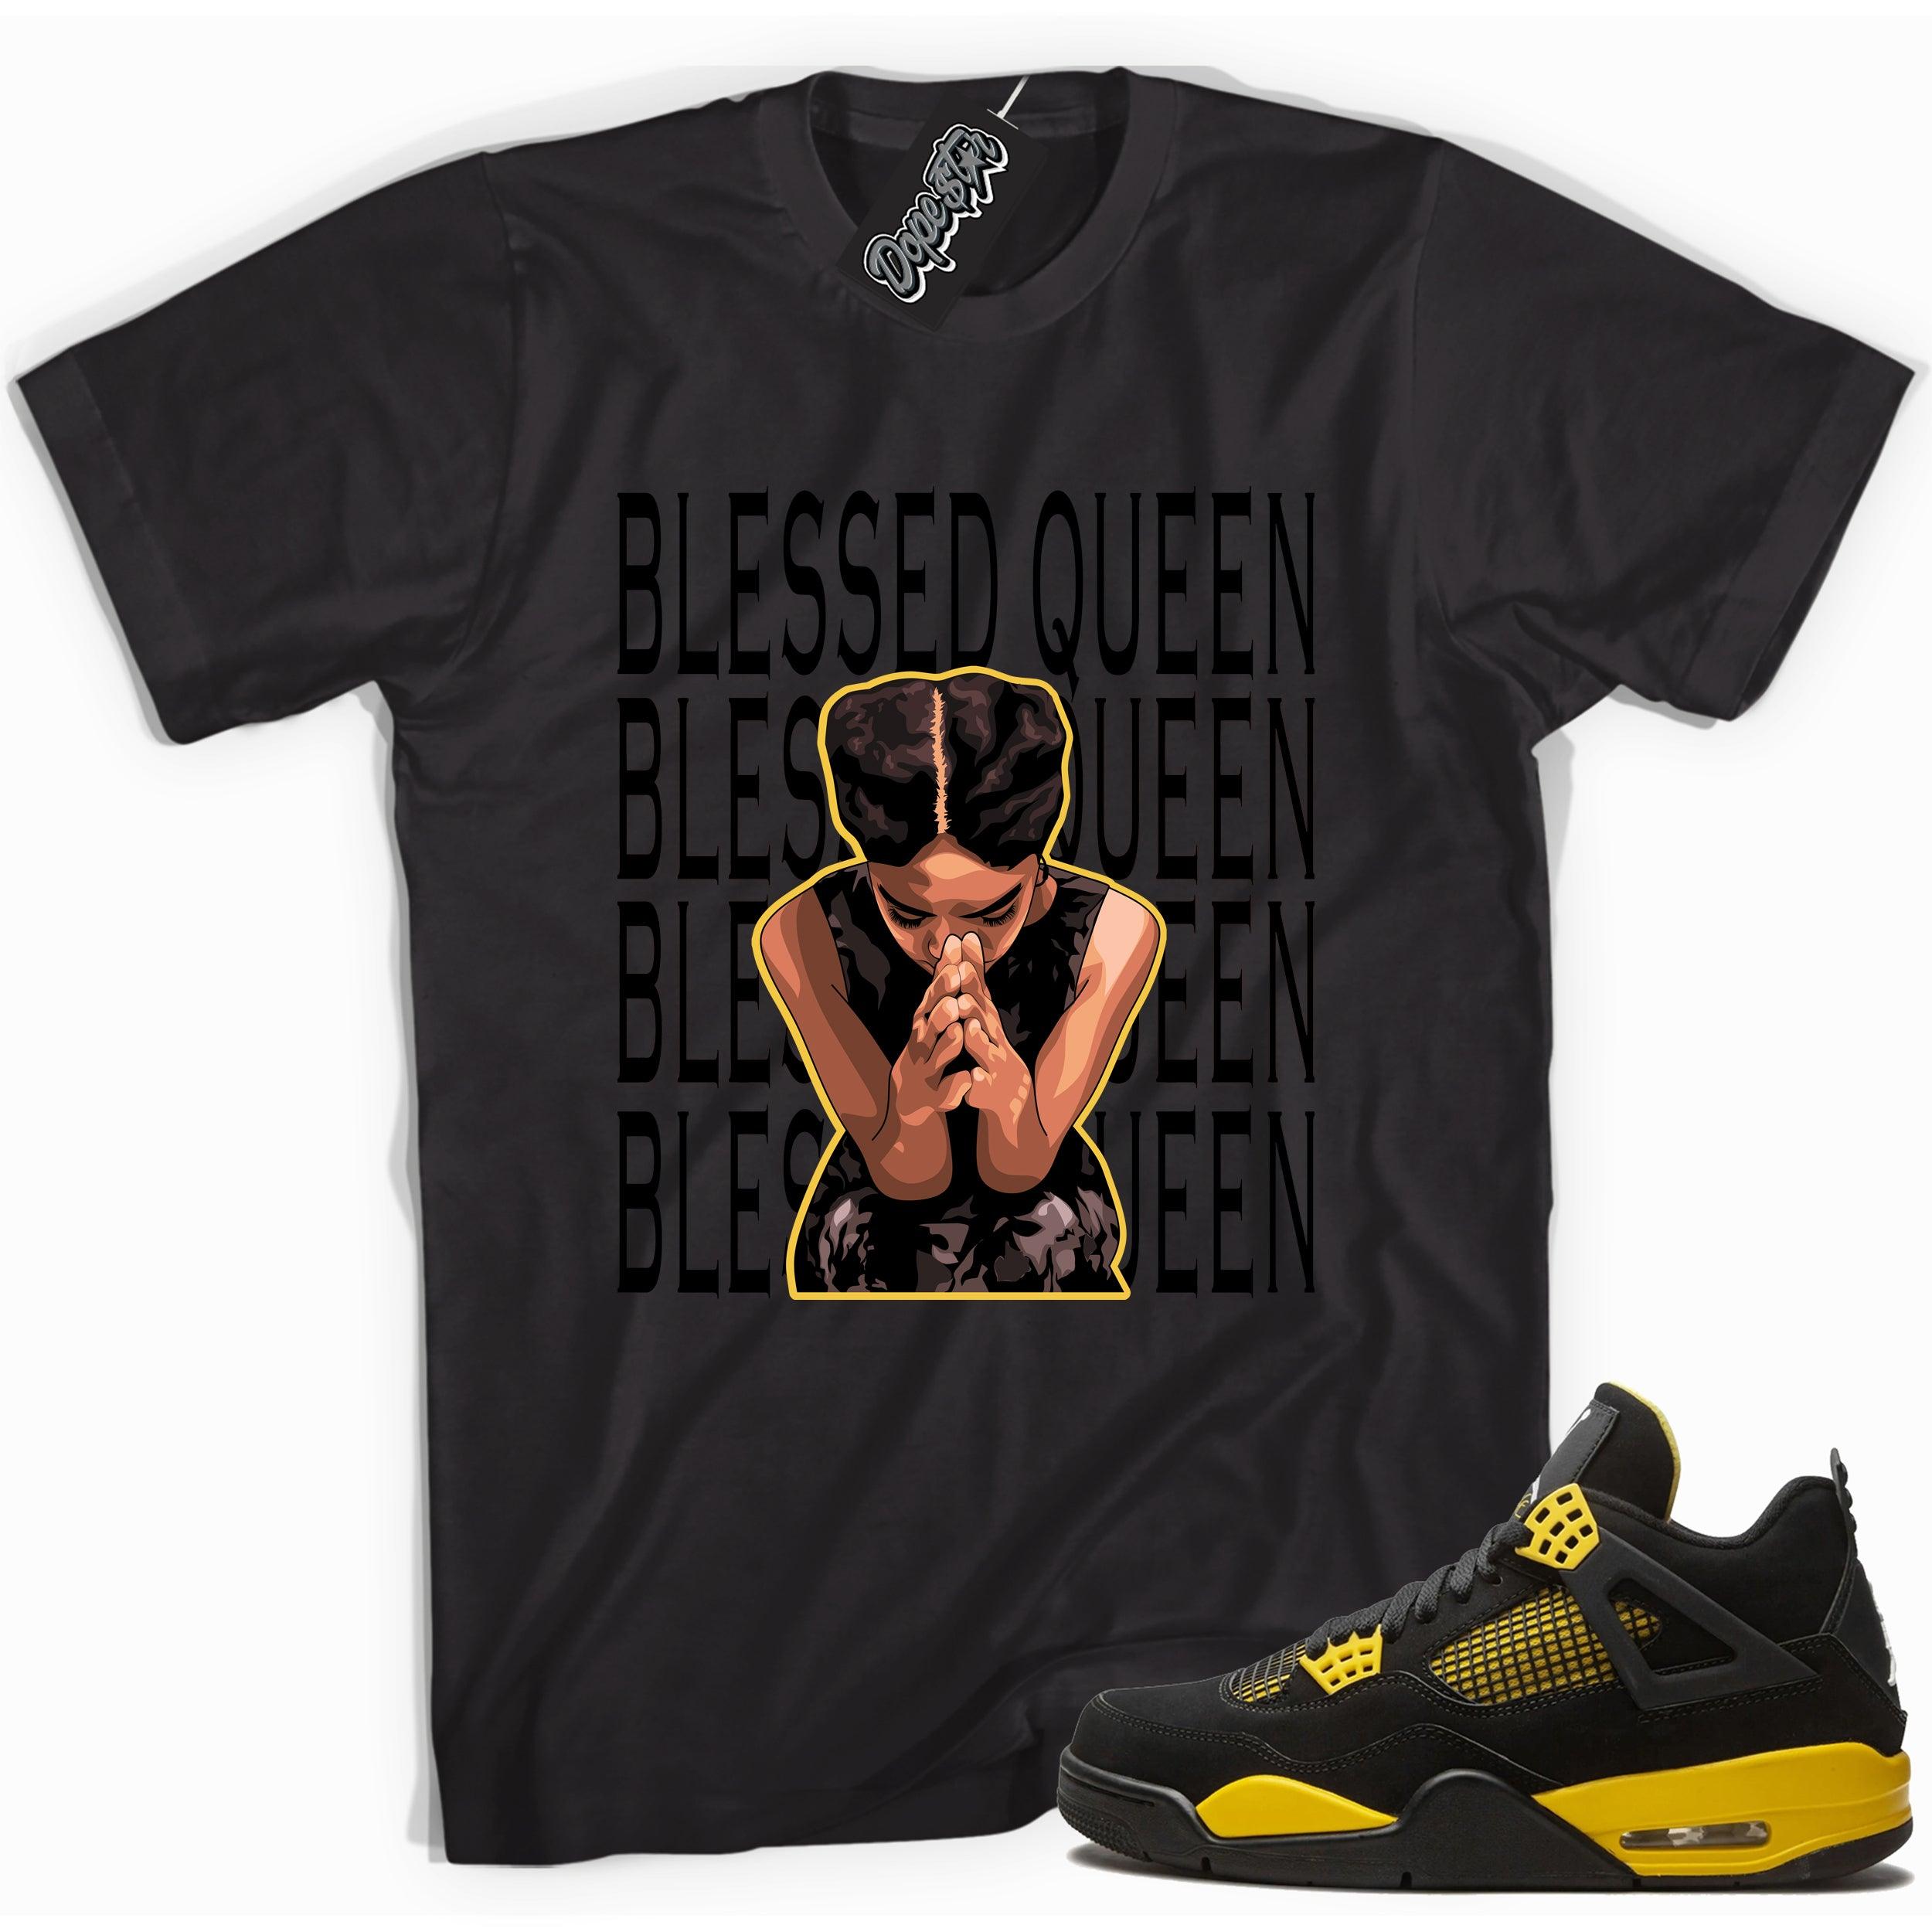 Cool black graphic tee with 'blessed queen' print, that perfectly matches  Air Jordan 4 Thunder sneakers